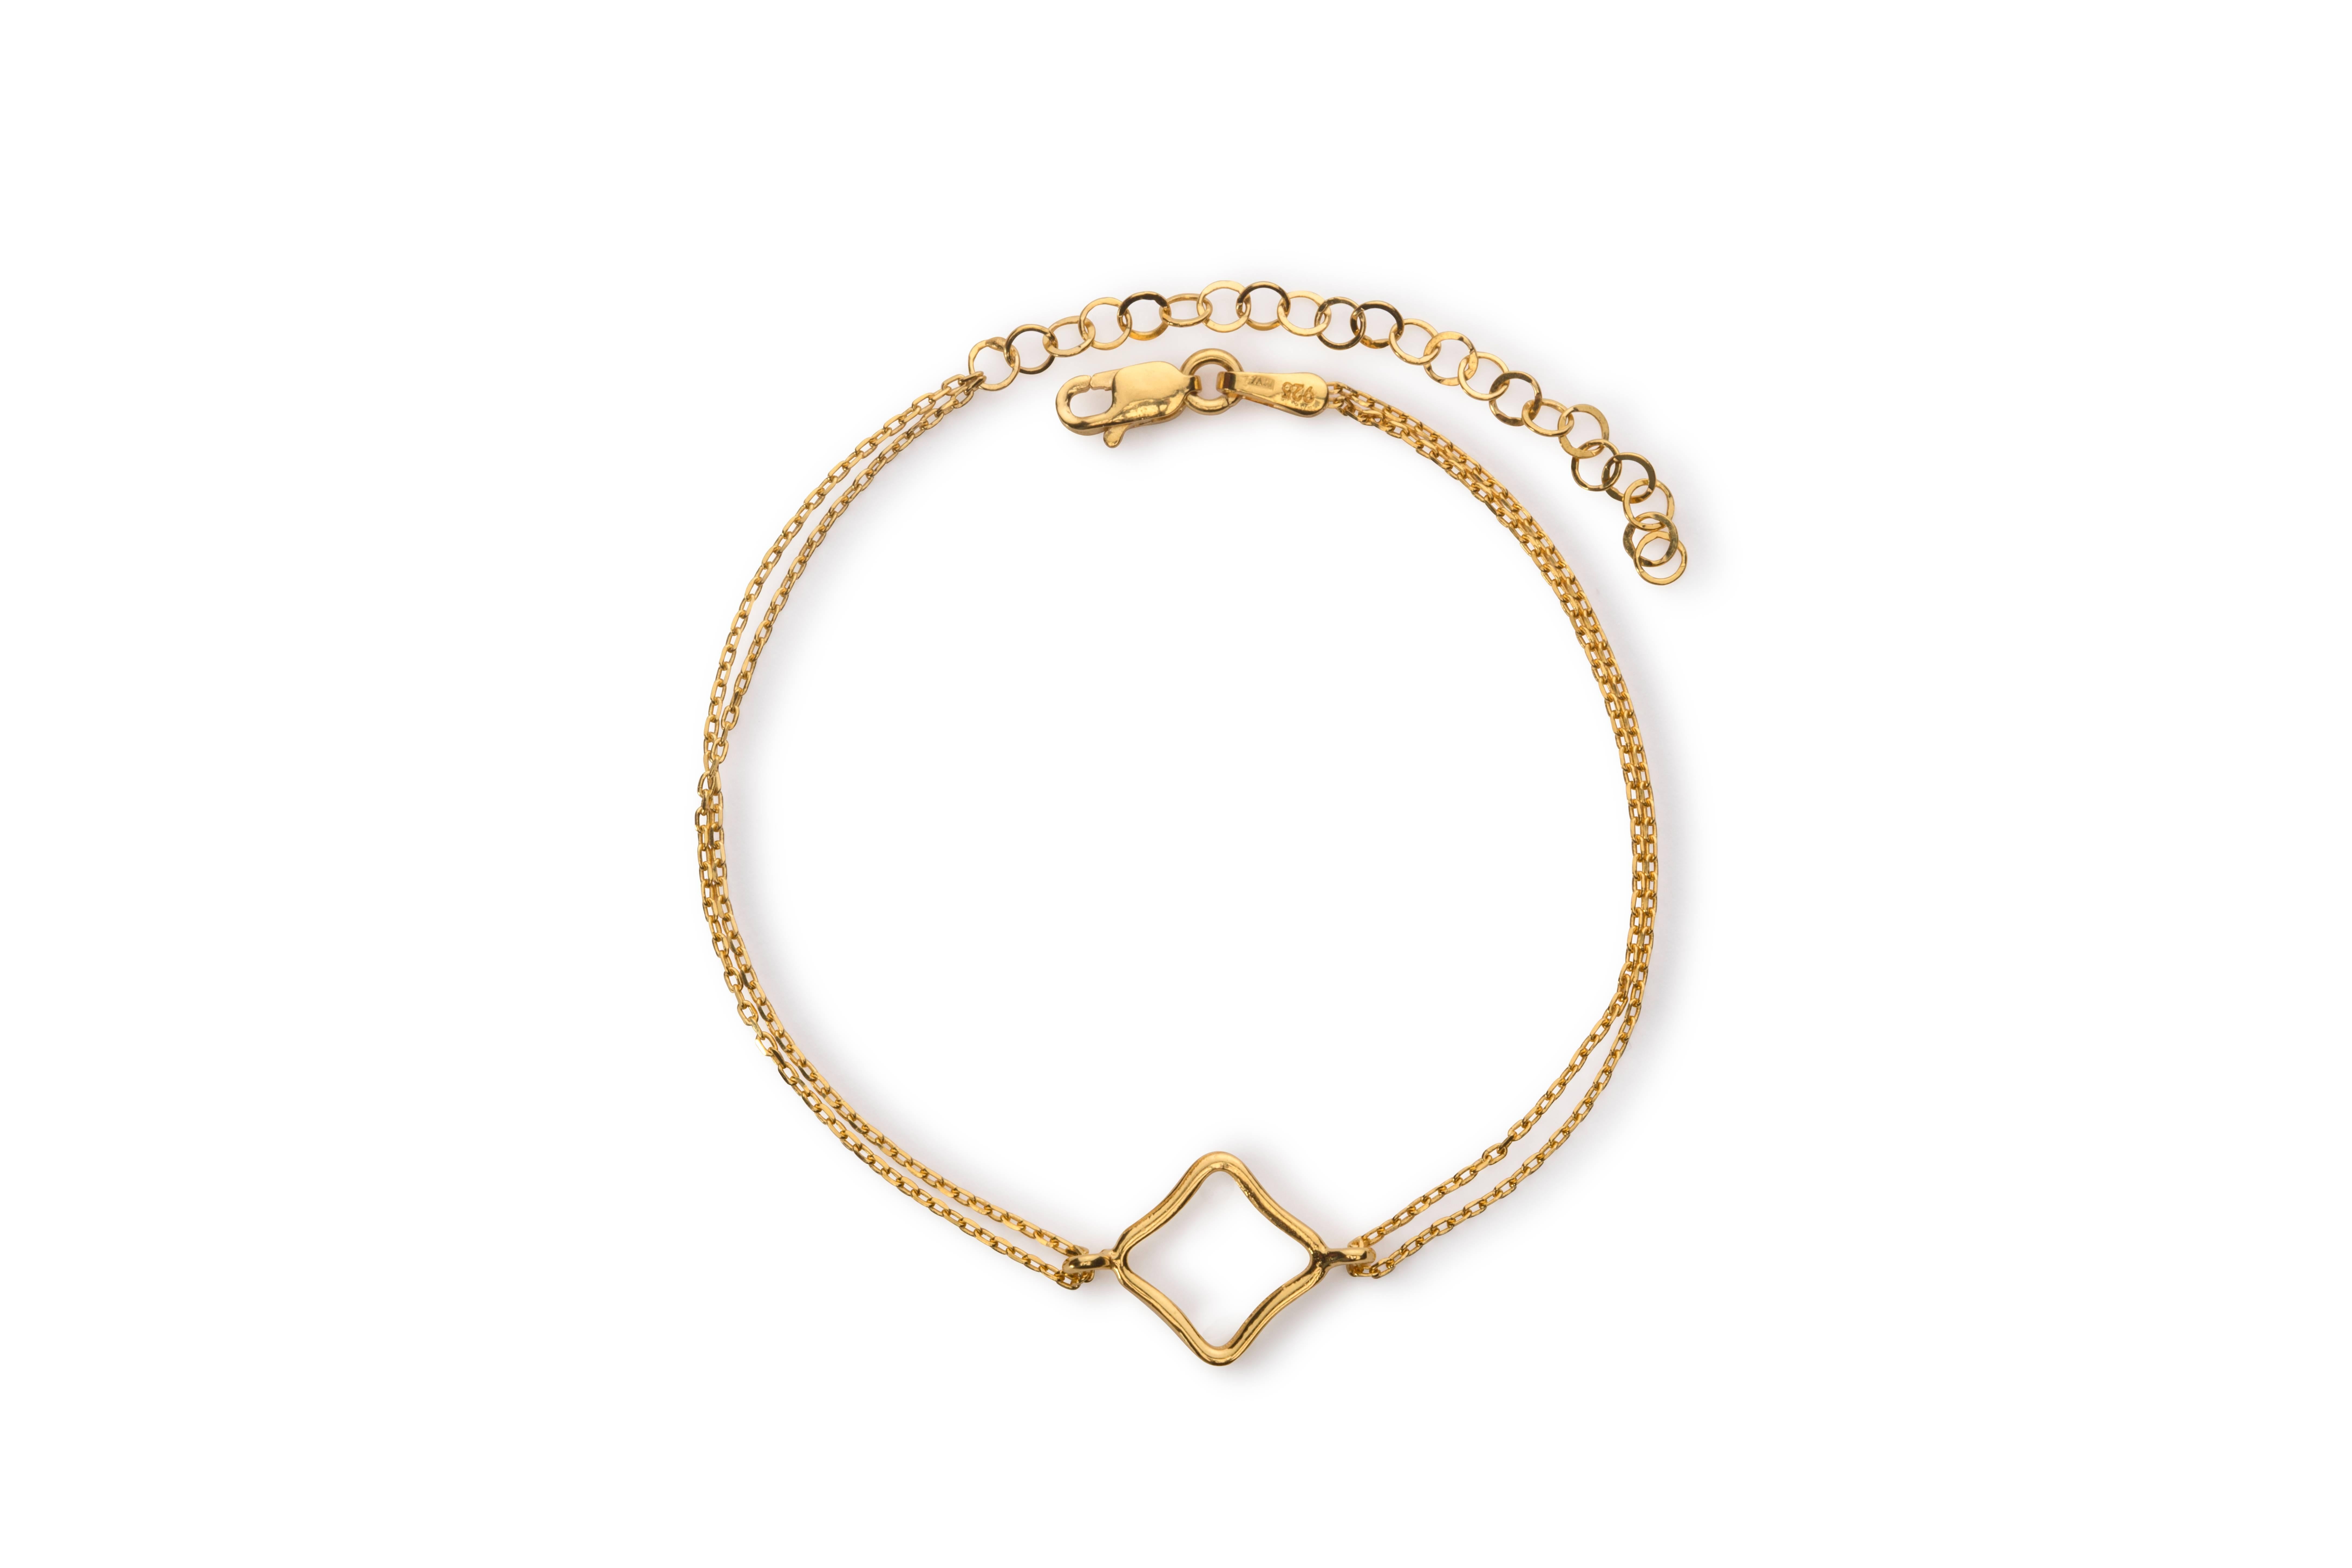 What a great bracelet to wear everyday, our small Bodrum bracelet looks especially lovely when layered, either with the other Bodrum bracelets or with our suede and leather cords. This vermeil bracelet features a 10x10mm Maviada logo design 1mm